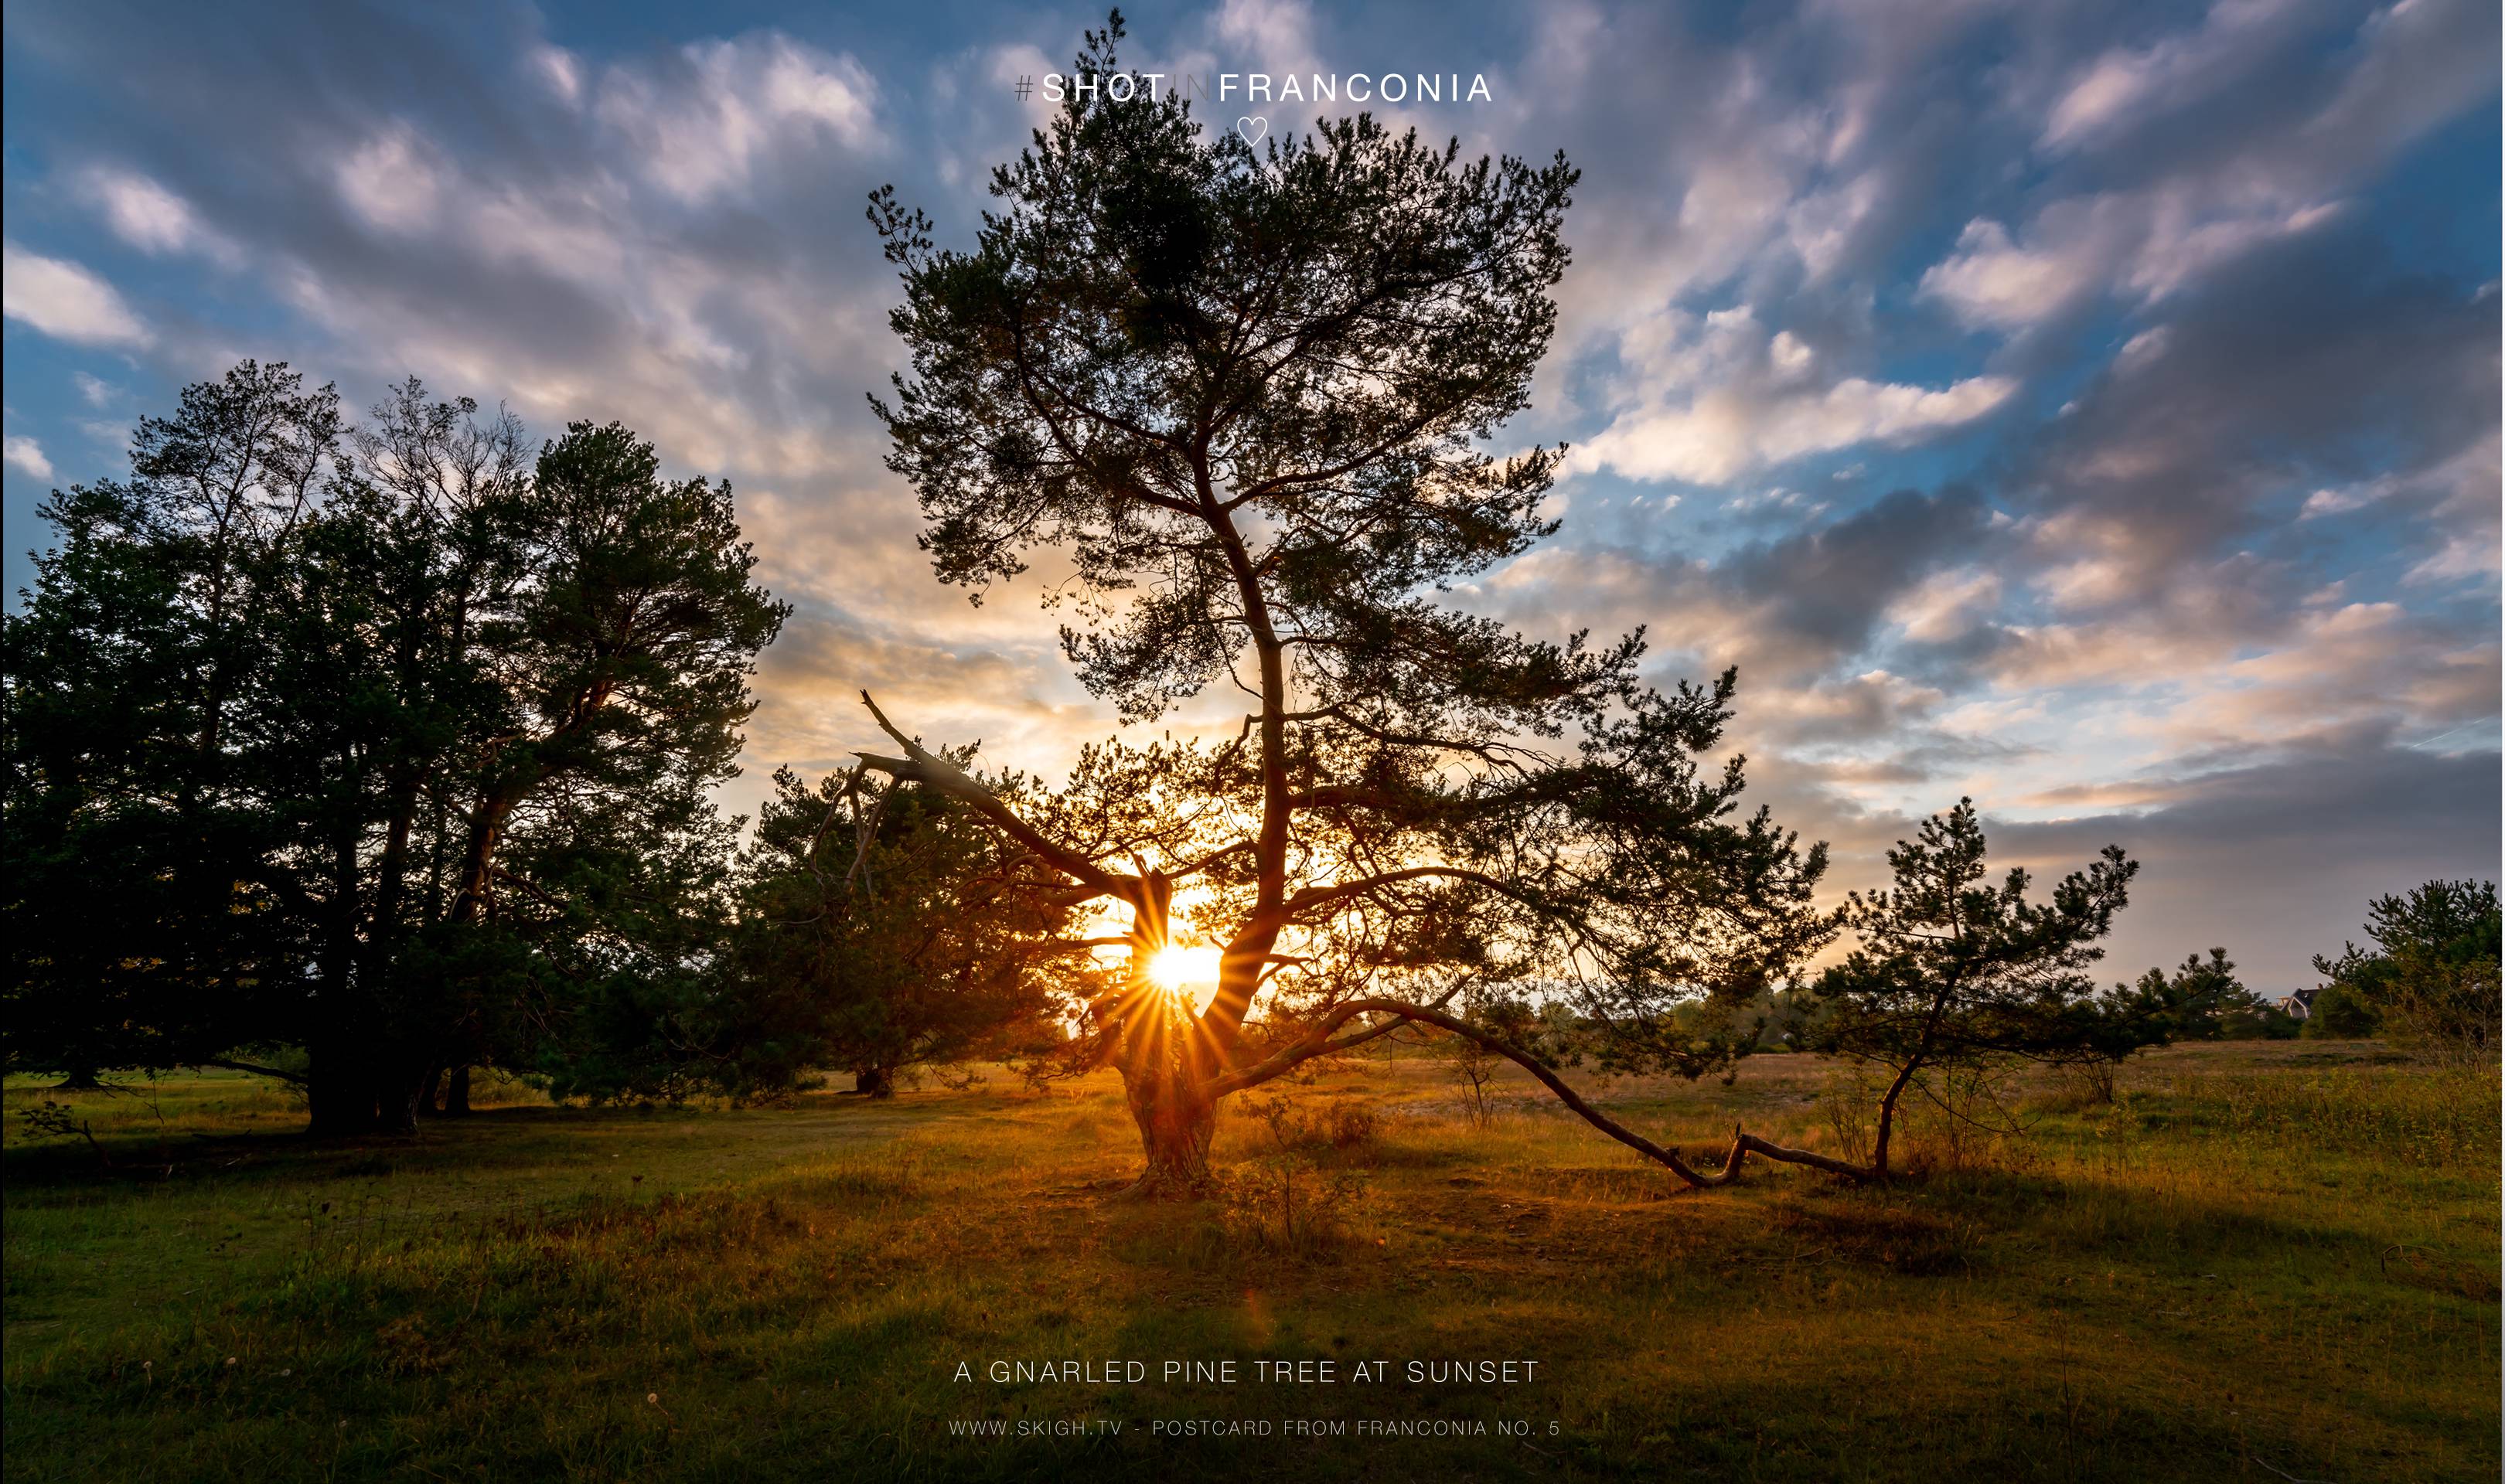 A gnarled pine tree at sunset